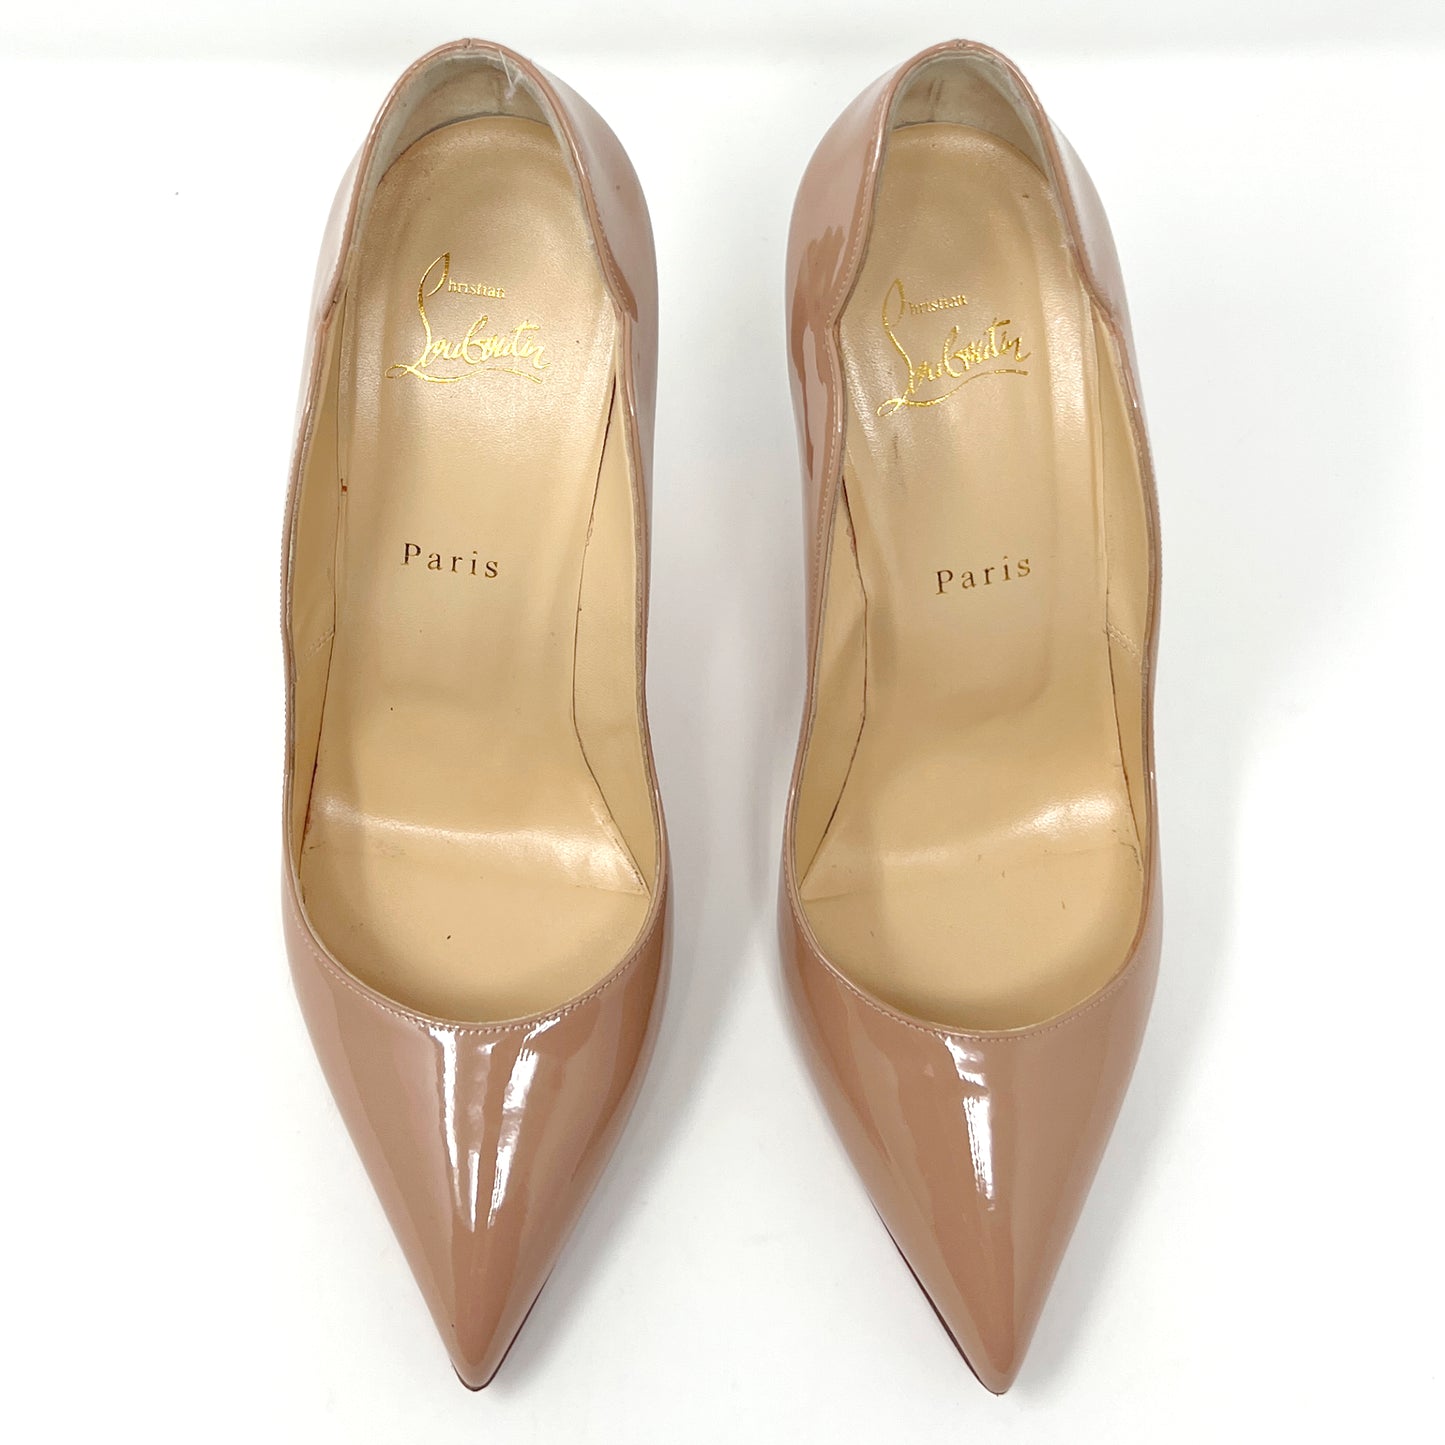 Christian Louboutin Hot Chick 100 Pointed Toe Patent Leather Nude Tan Heels Pumps